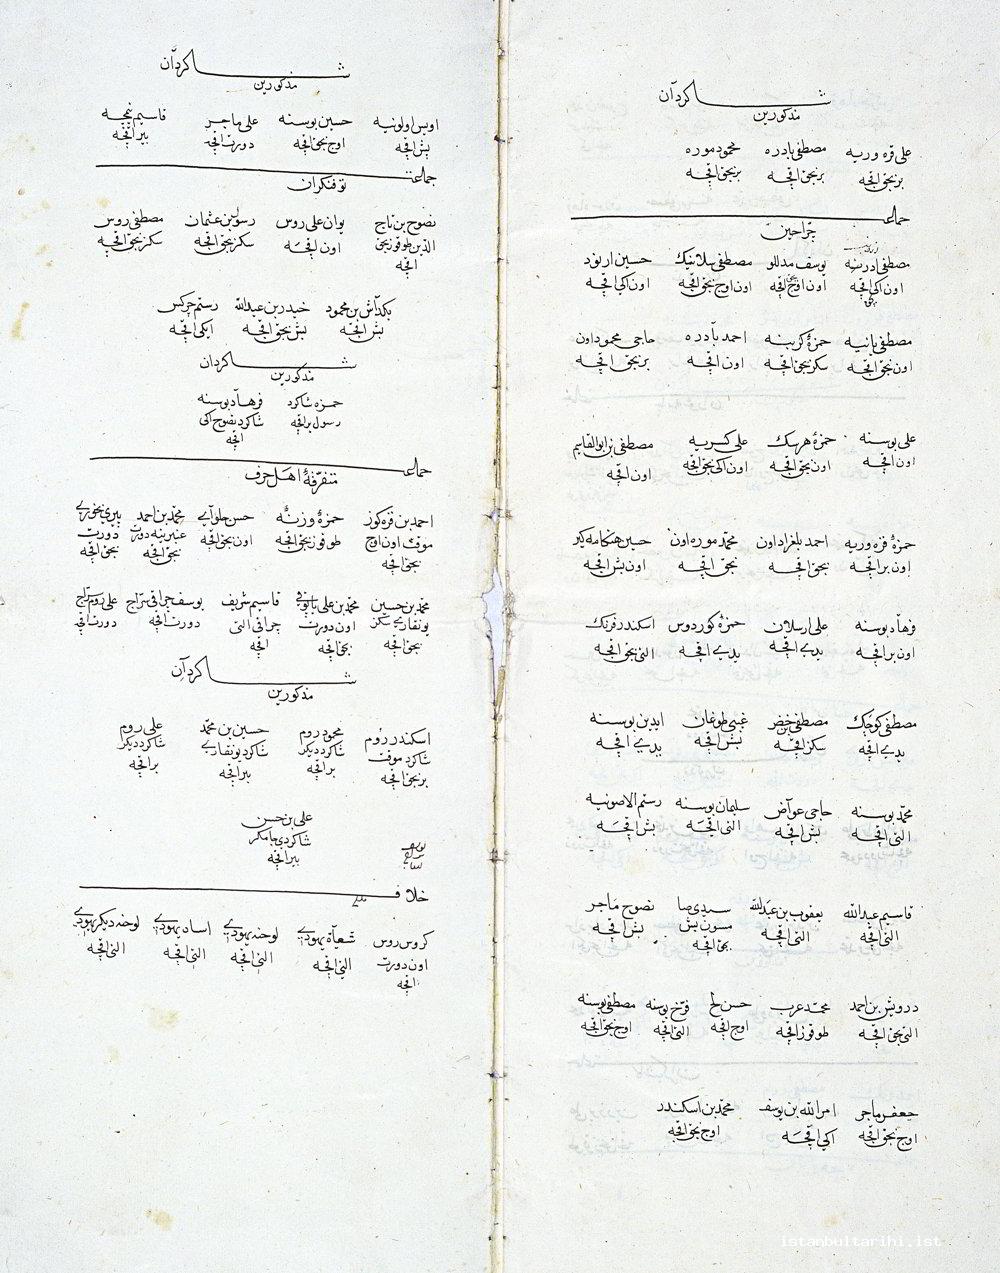 3- The names and daily wages of surgeons and medical schools (Topkapı Palace  Museum Archive, D. 9706)